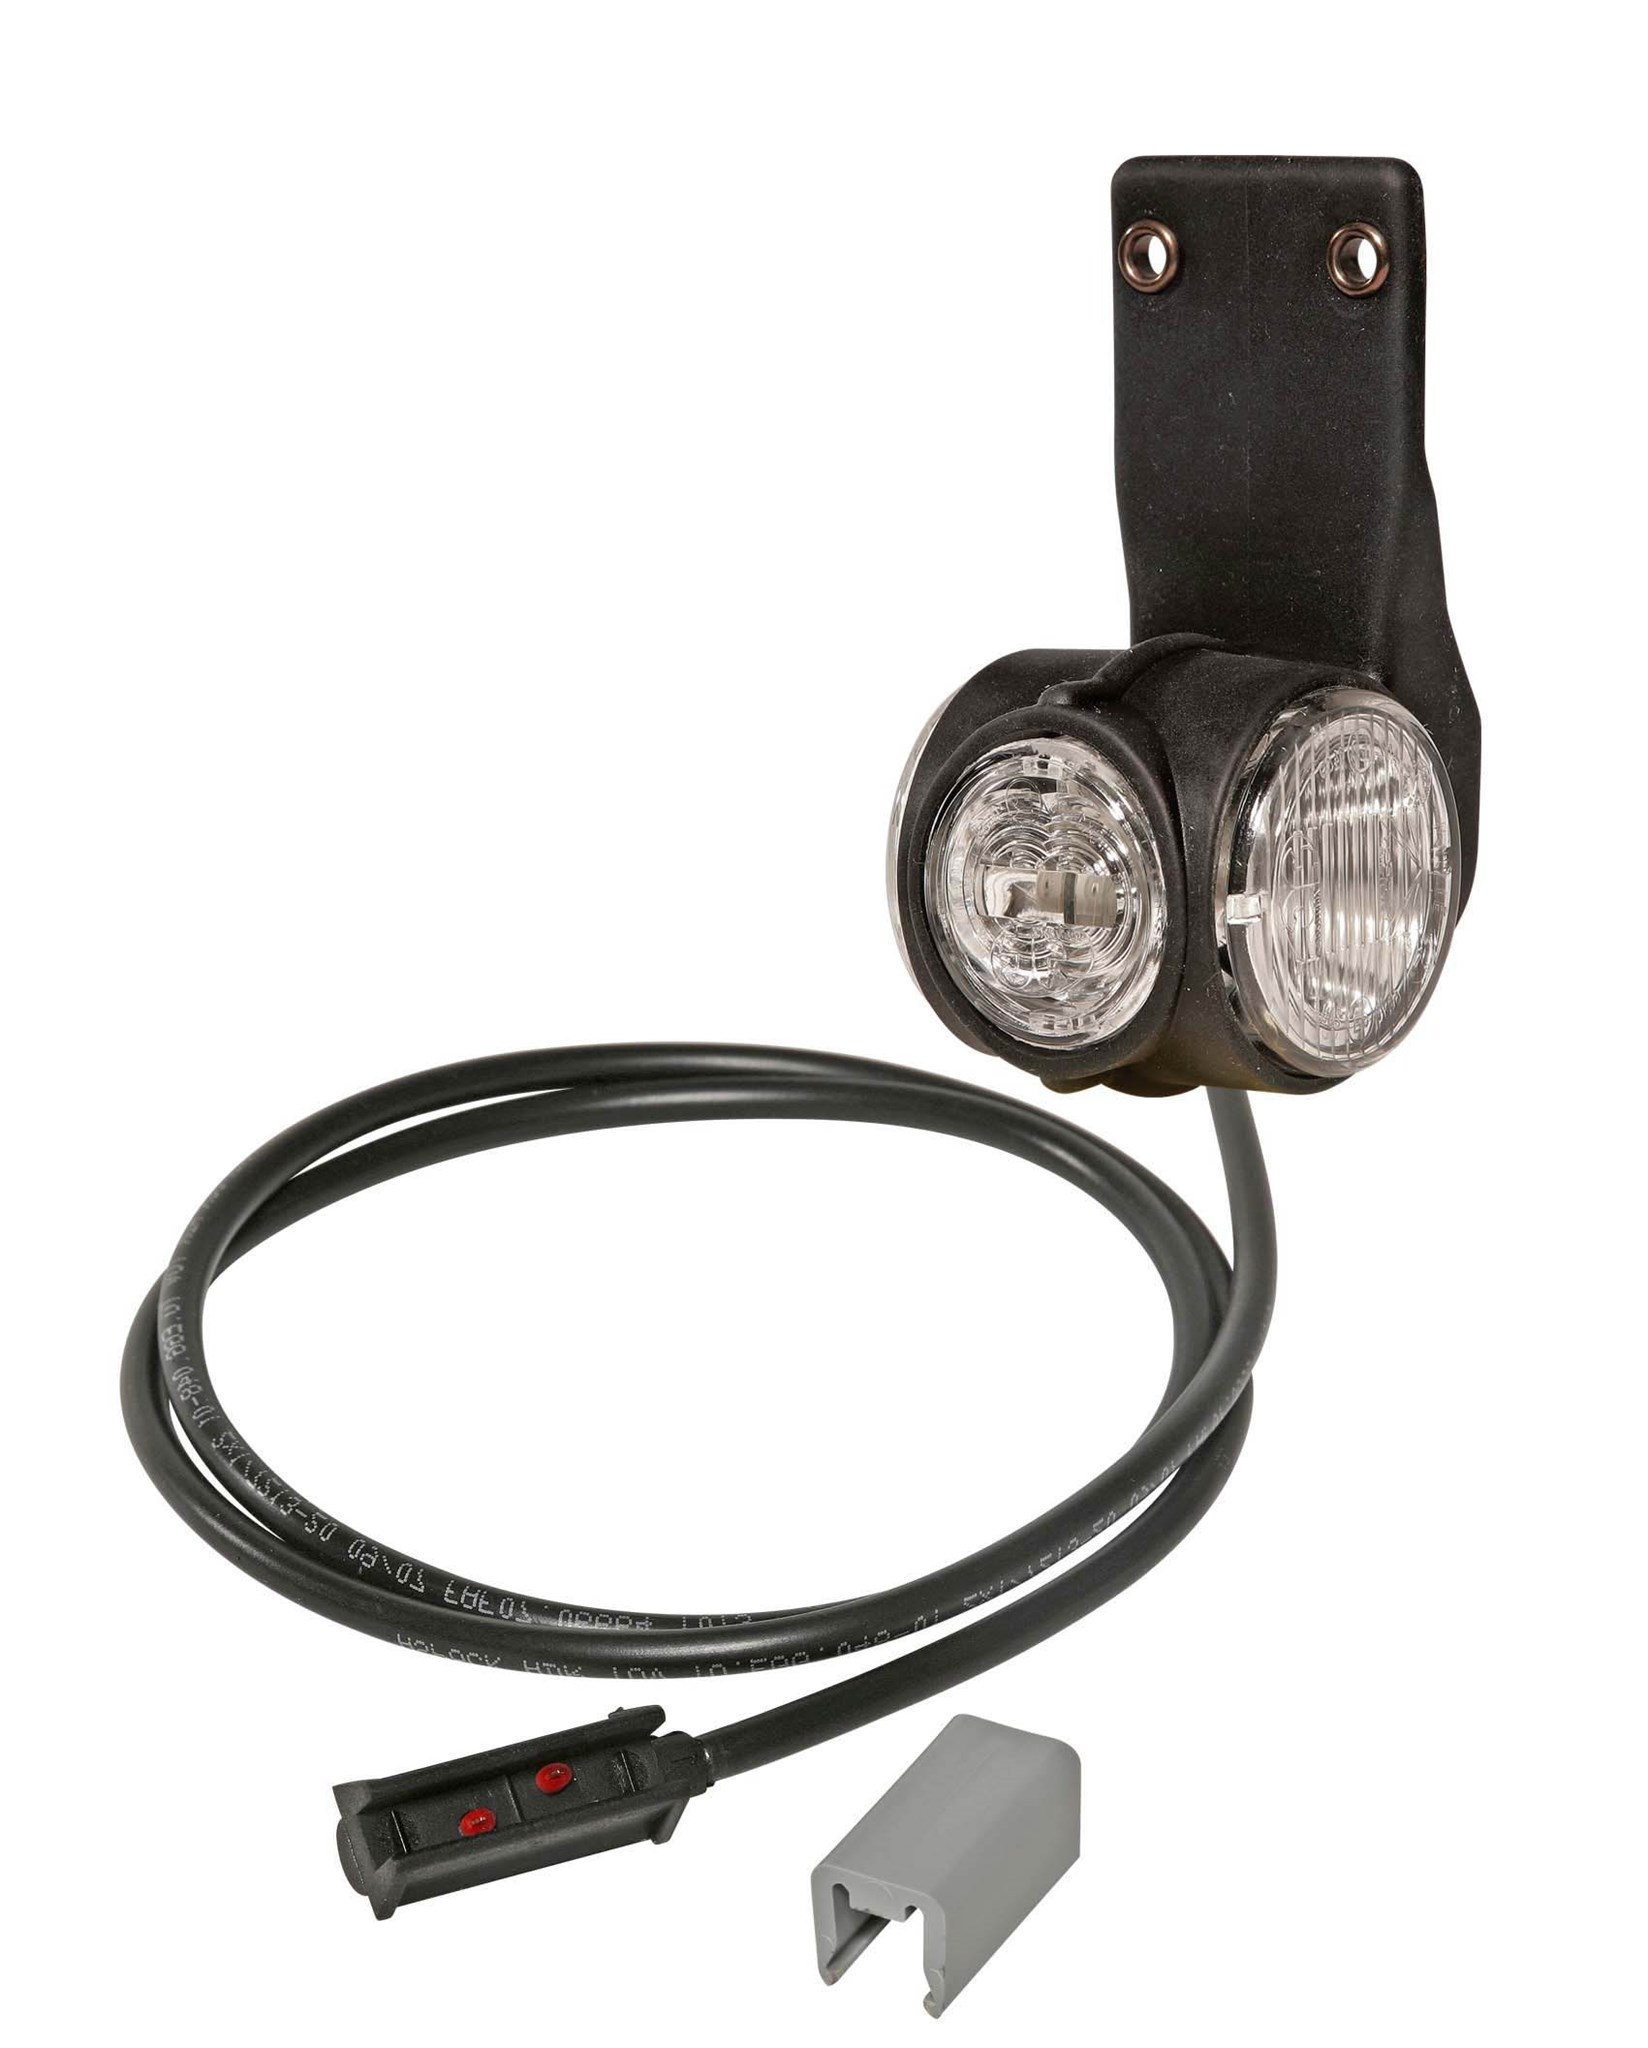 Picture of 31-3364-024 Aspöck Superpoint III rechts, Pendelhalter P&R 1500mm ro/we/or, LED